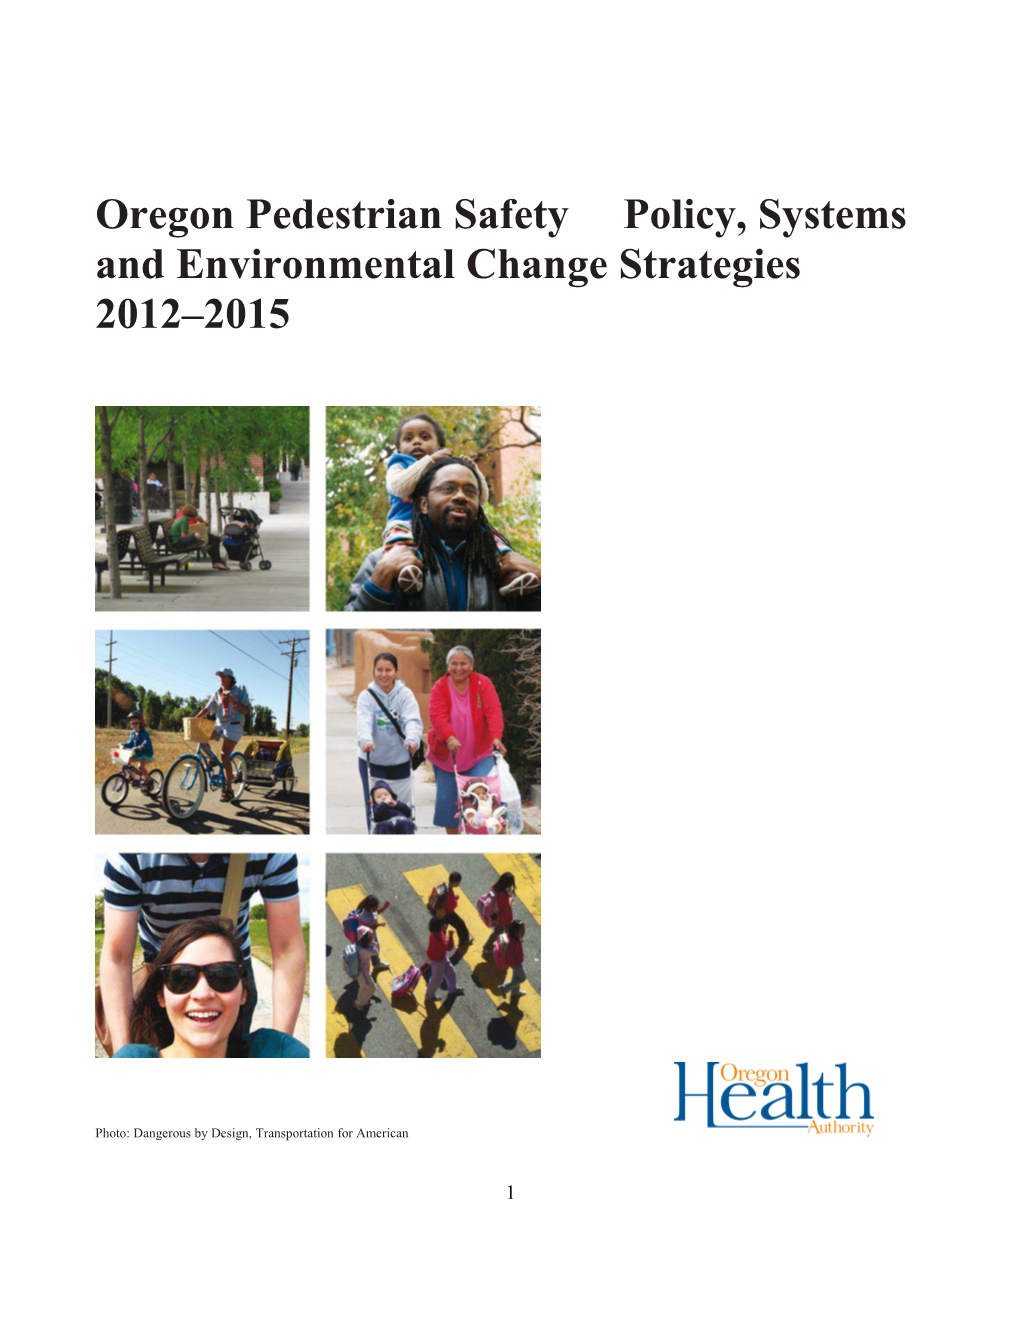 Oregon Pedestrian Safety Policy, Systems and Environmental Change Strategies